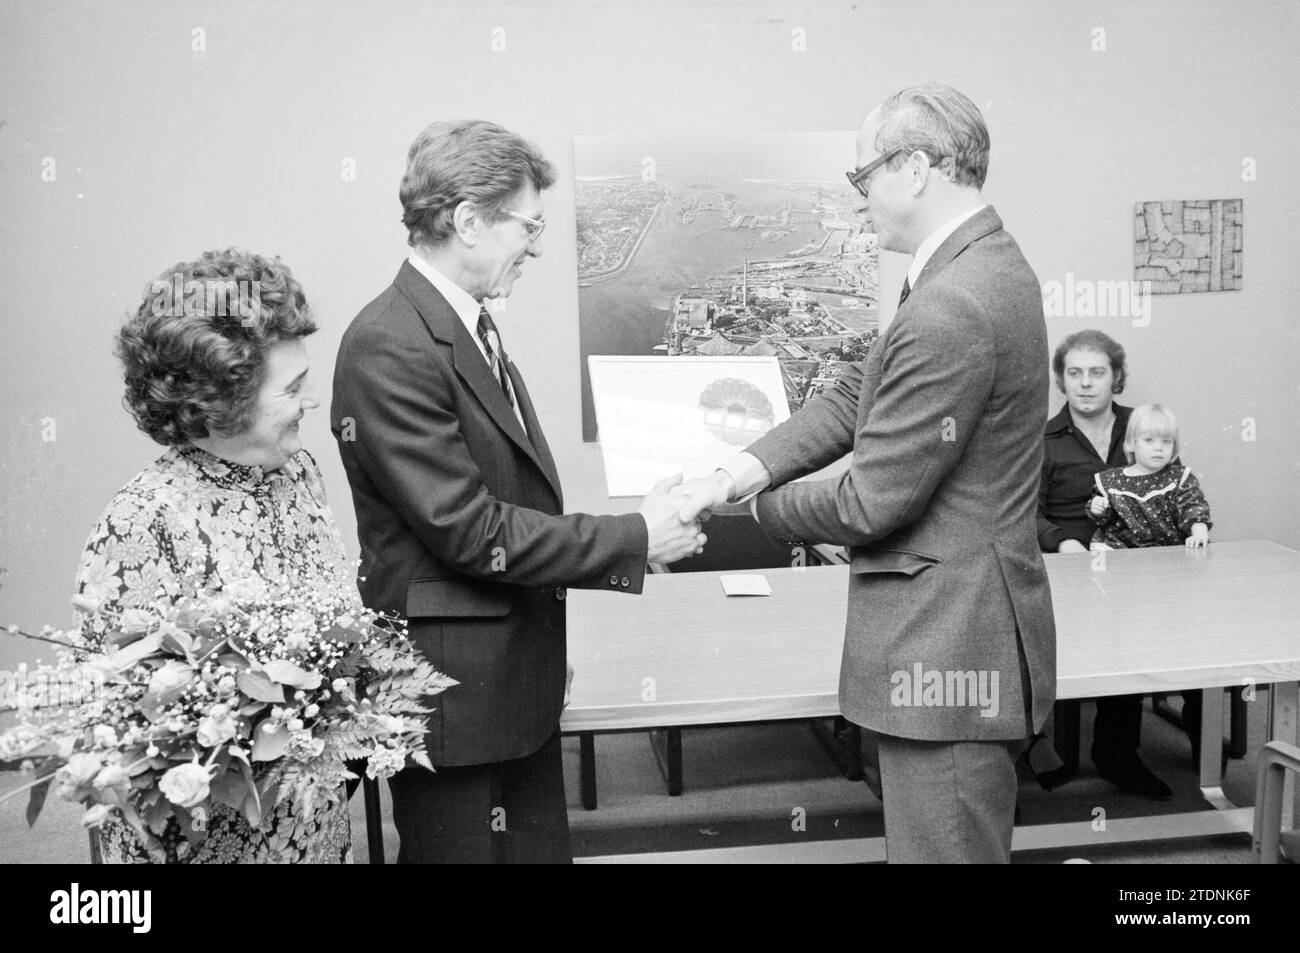 Presentation of 'Honourable certificate' to Mr. De Graaf, by Van Gelder, 28-01-1981, Whizgle News from the Past, Tailored for the Future. Explore historical narratives, Dutch The Netherlands agency image with a modern perspective, bridging the gap between yesterday's events and tomorrow's insights. A timeless journey shaping the stories that shape our future Stock Photo